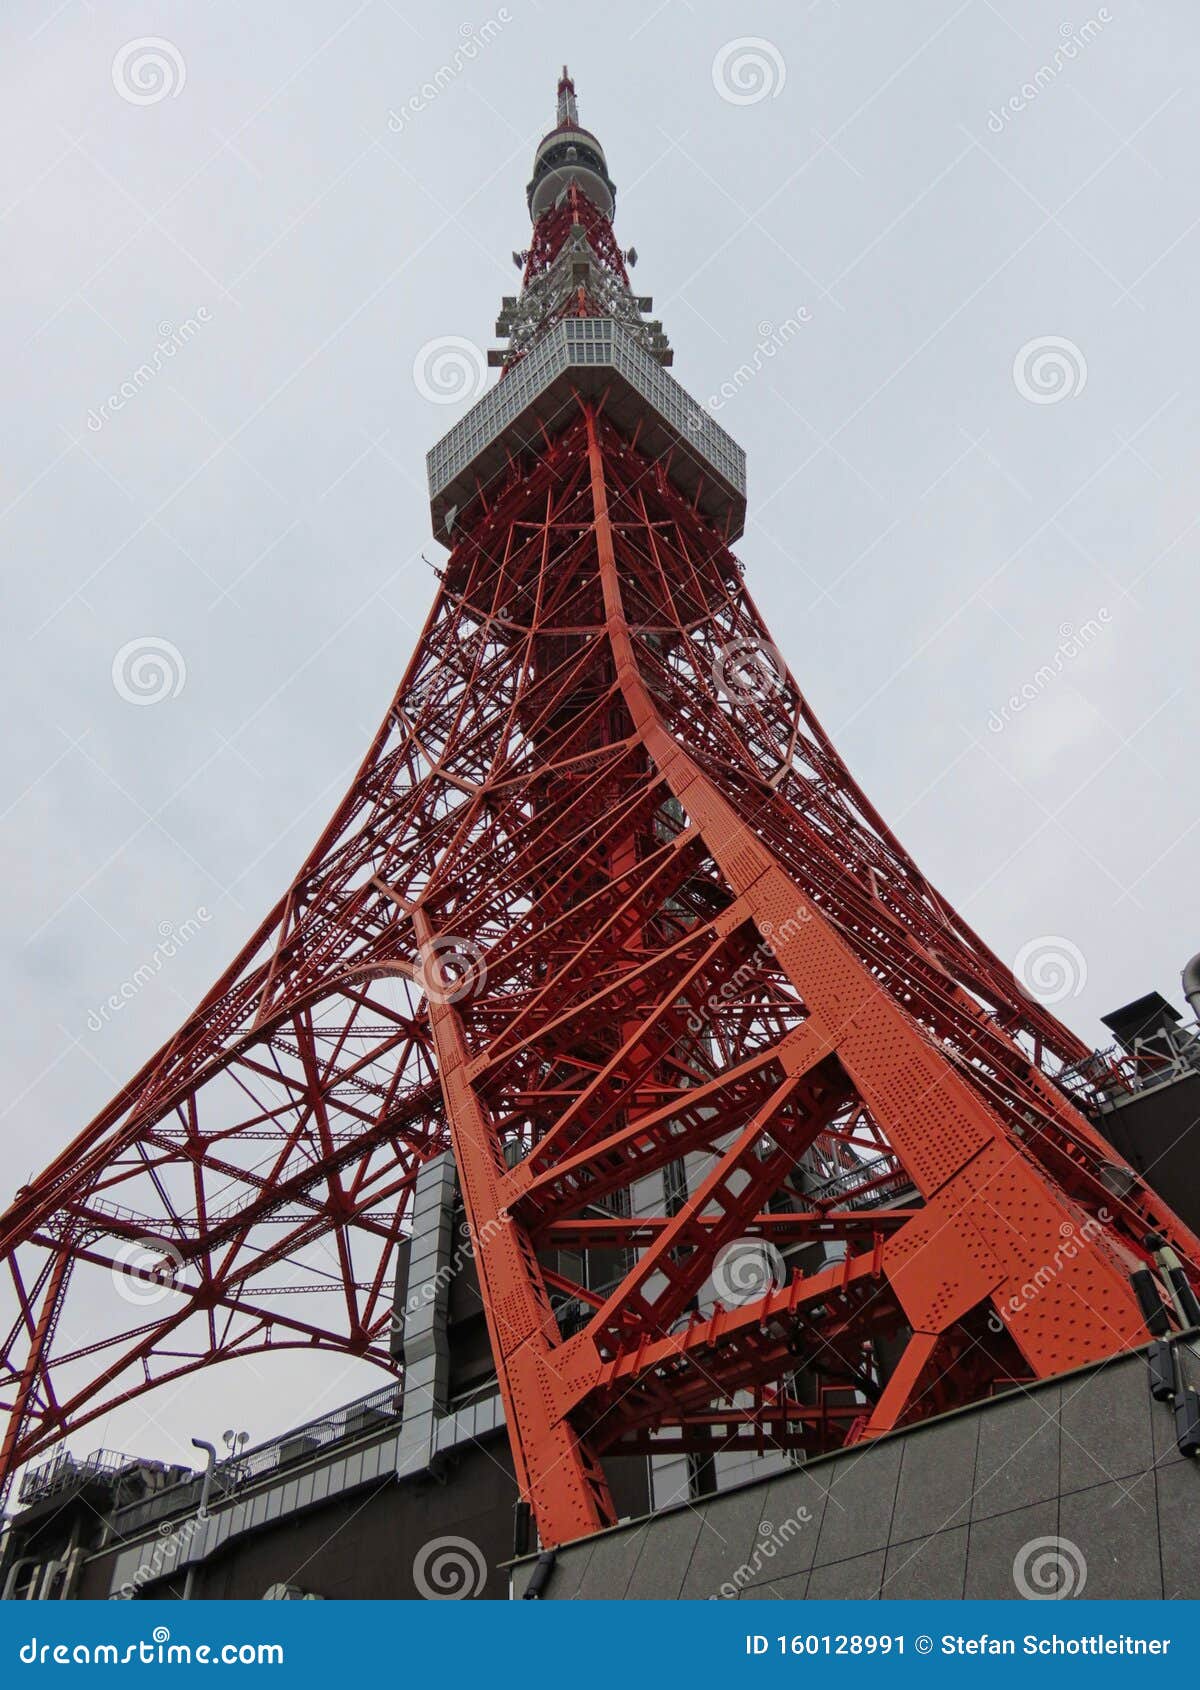 The tokyo tower in japan stock image. Image of tallest - 160128991